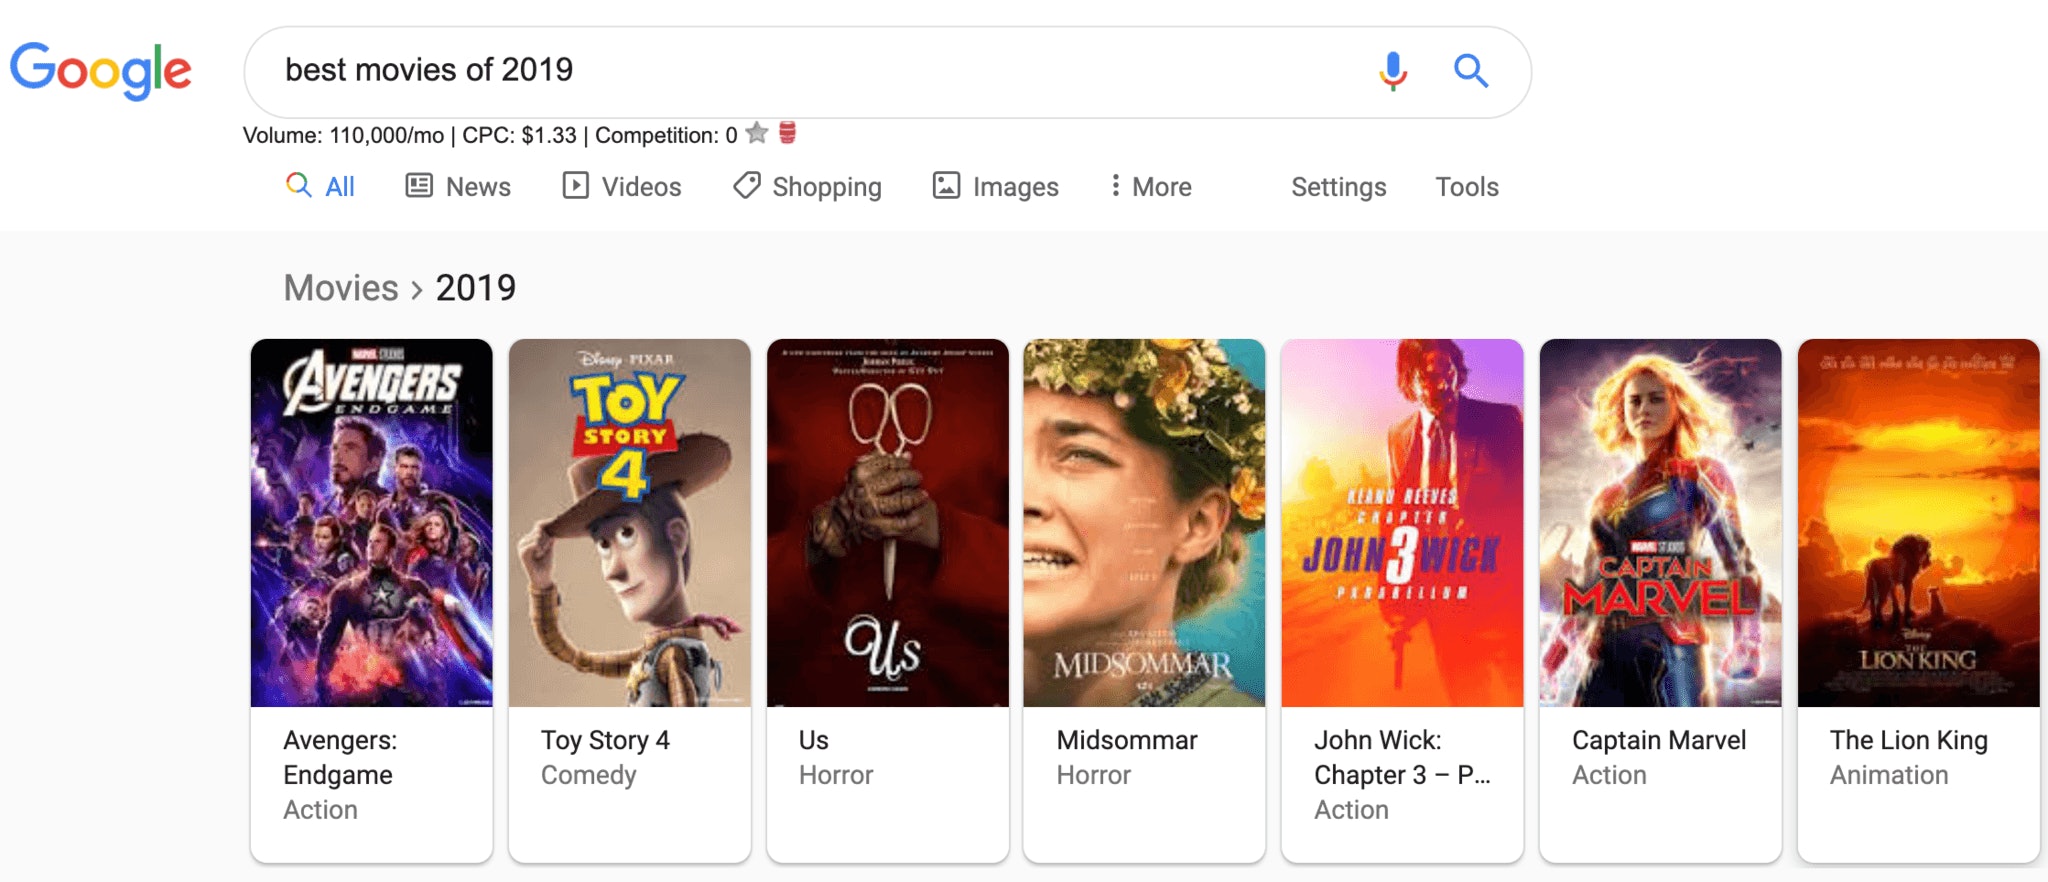 top movies of 2019 search result